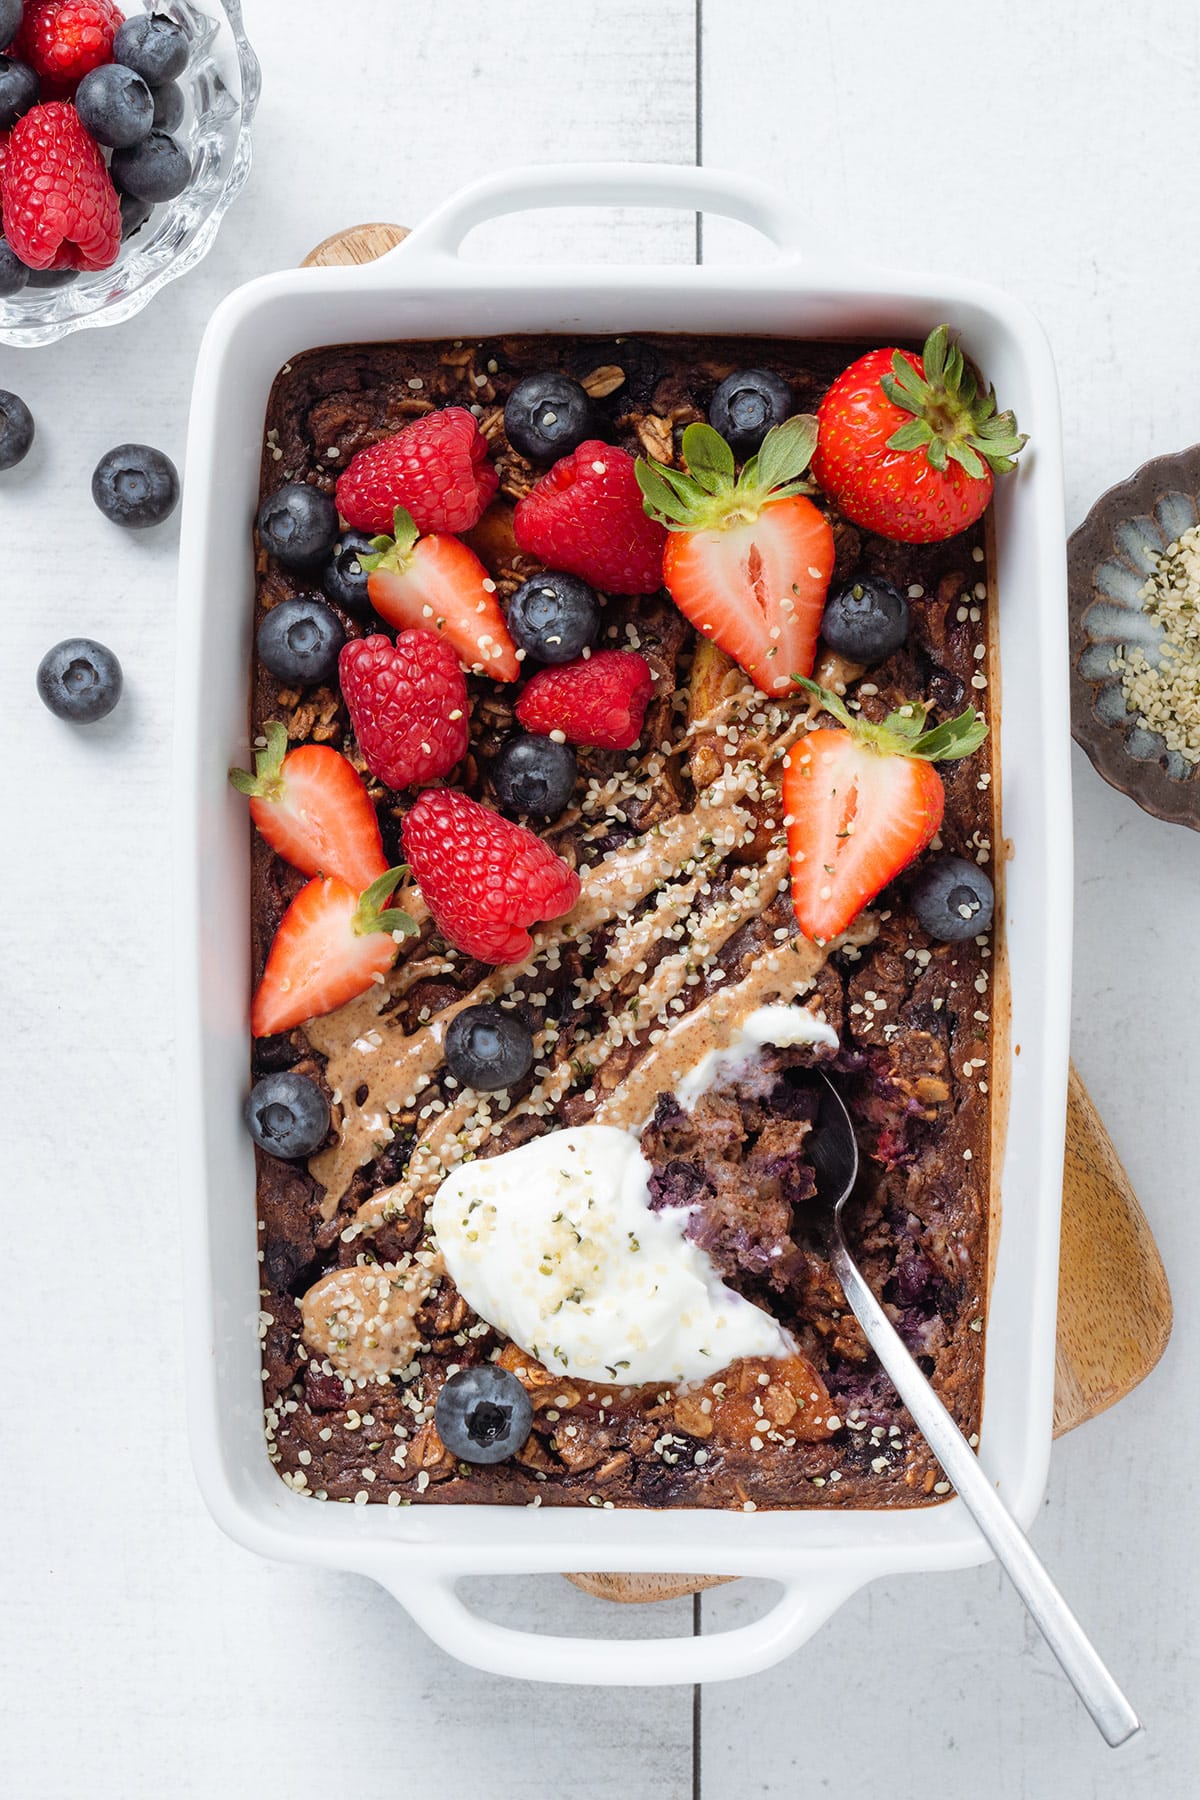 Baked oatmeal in a white baking dish garnished with fresh berries and almond butter with a spoon inserted on the right.